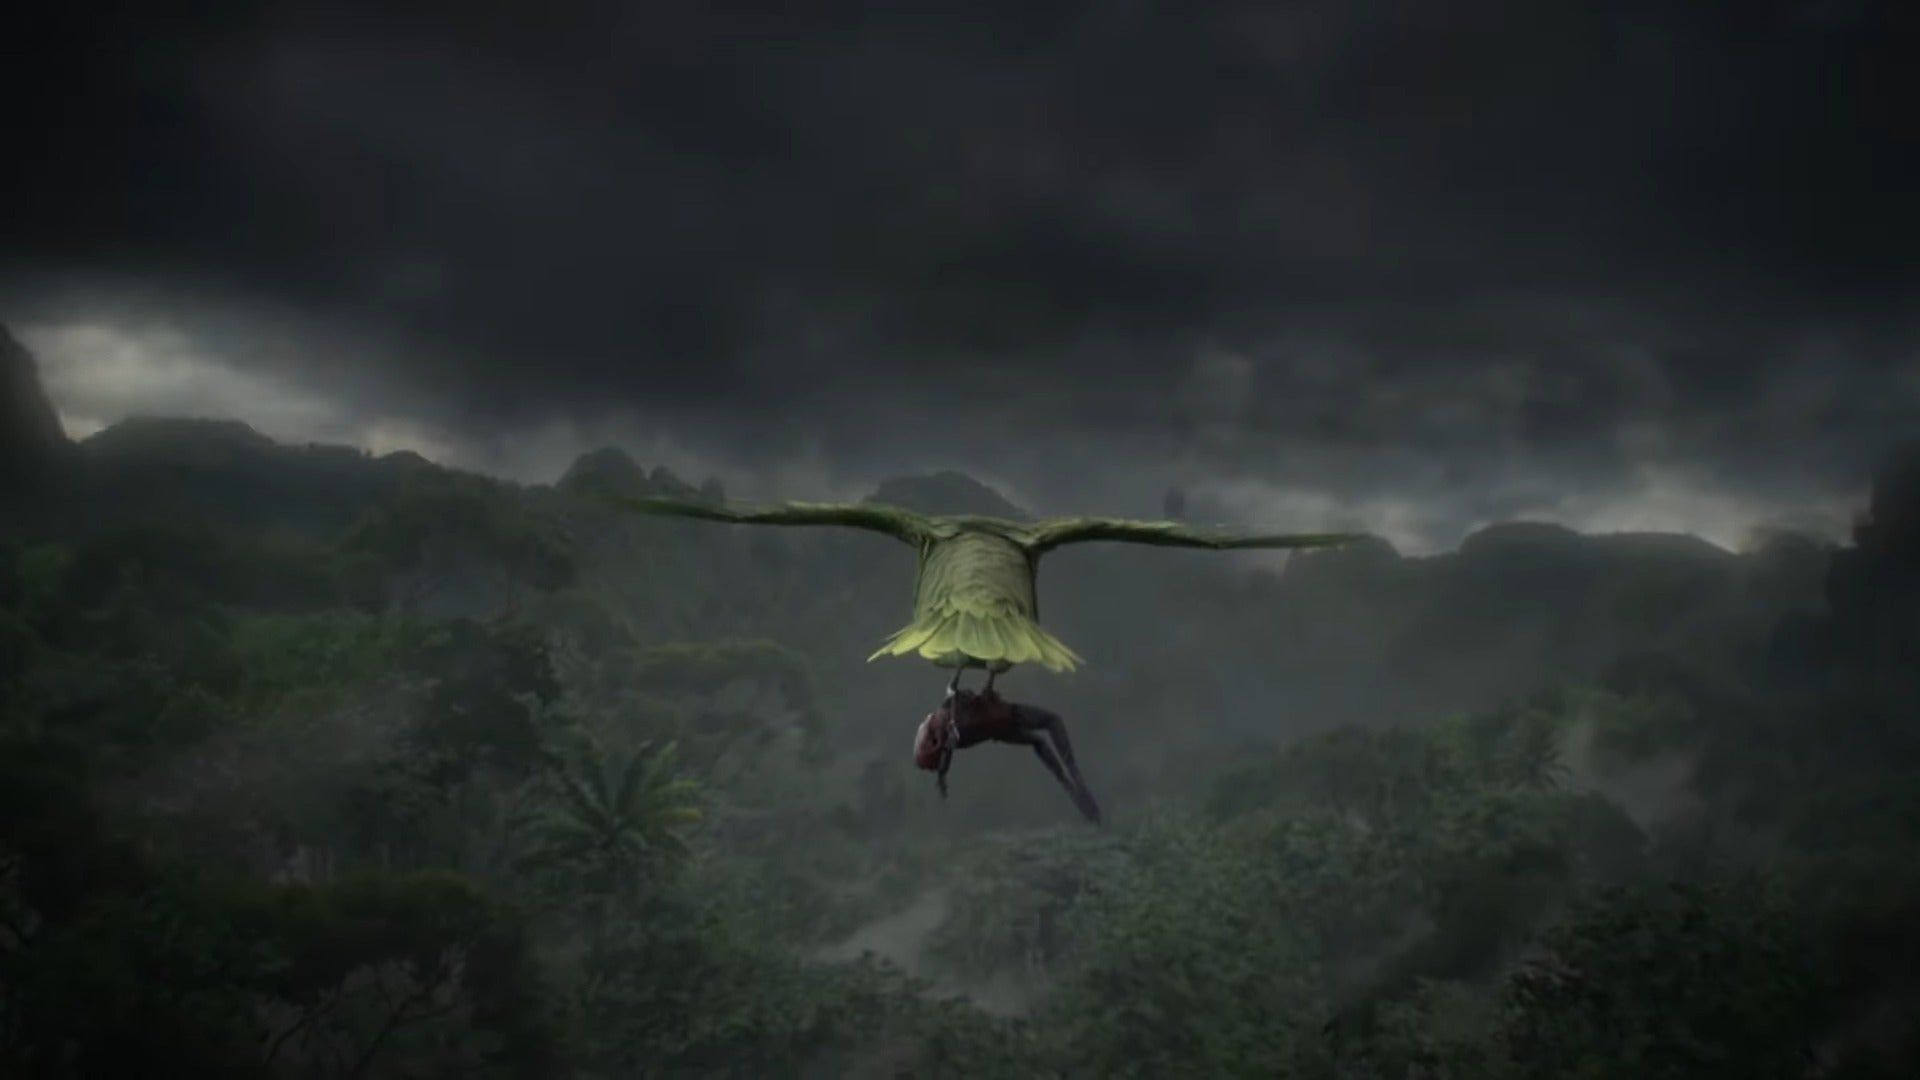 A bird carrying a frog over the Jungle in the Metal gear solid 3 remake trailer